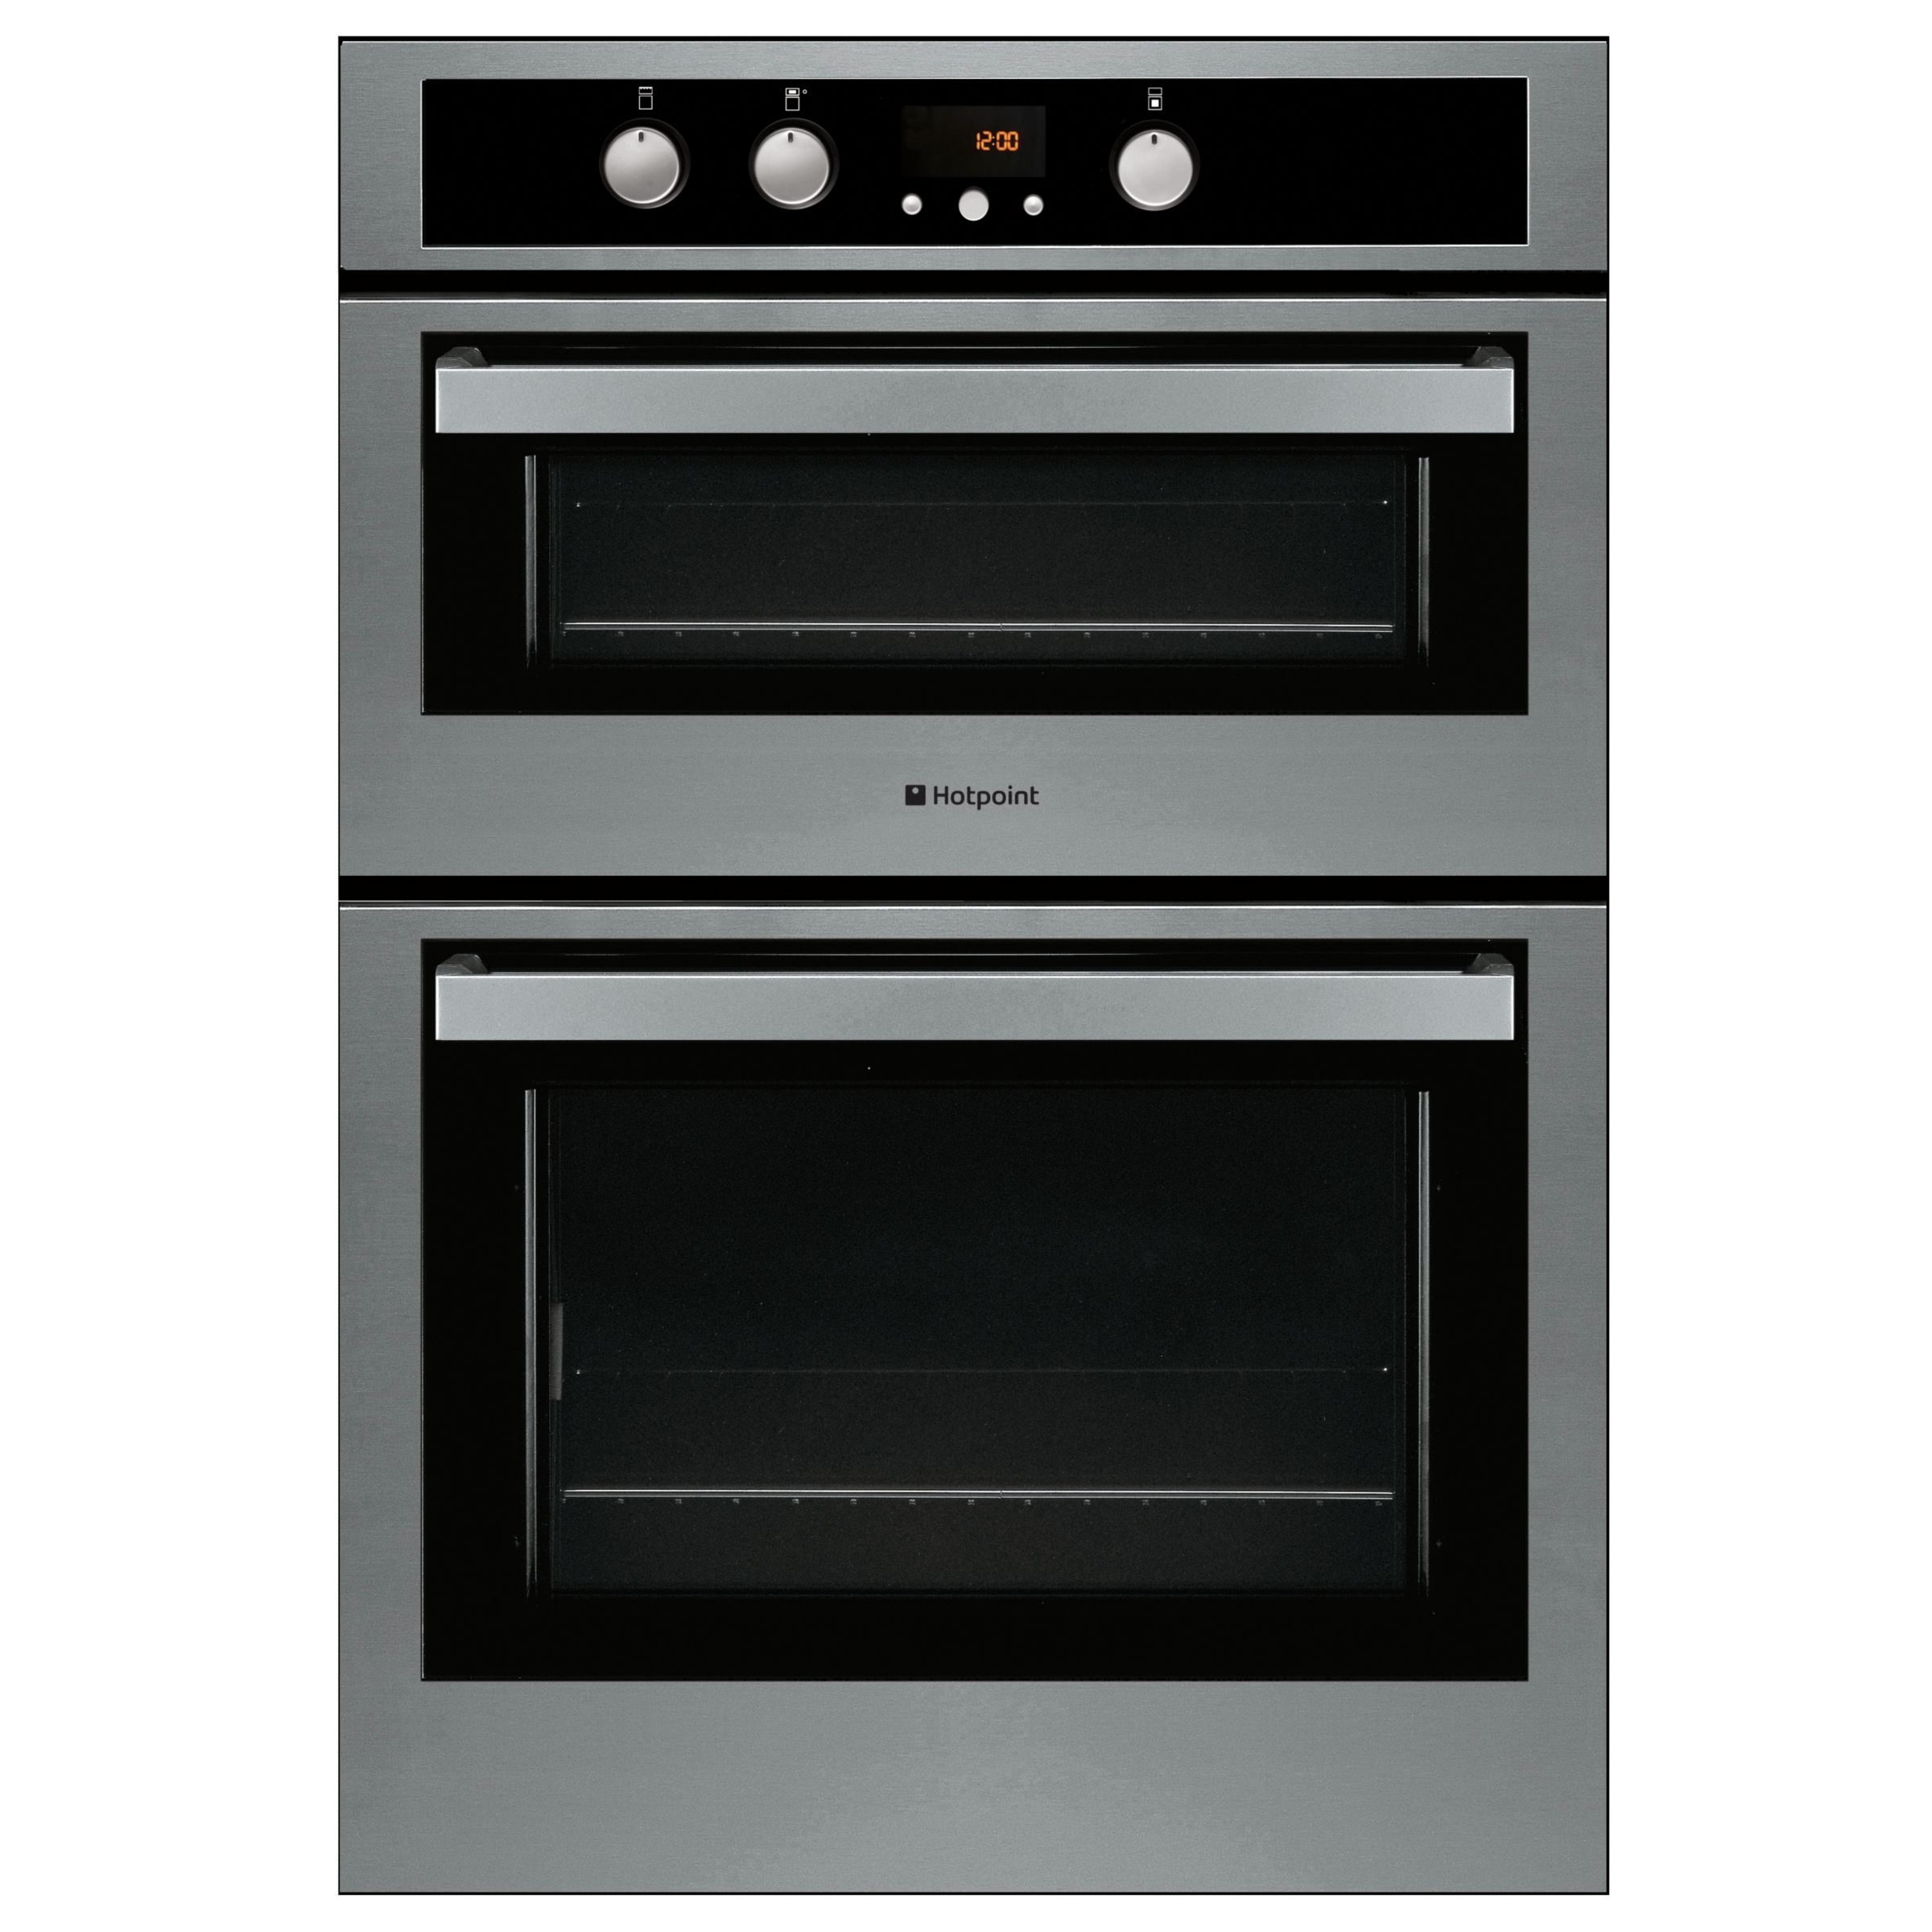 Hotpoint DE89X Double Electric Oven, Stainless Steel at John Lewis